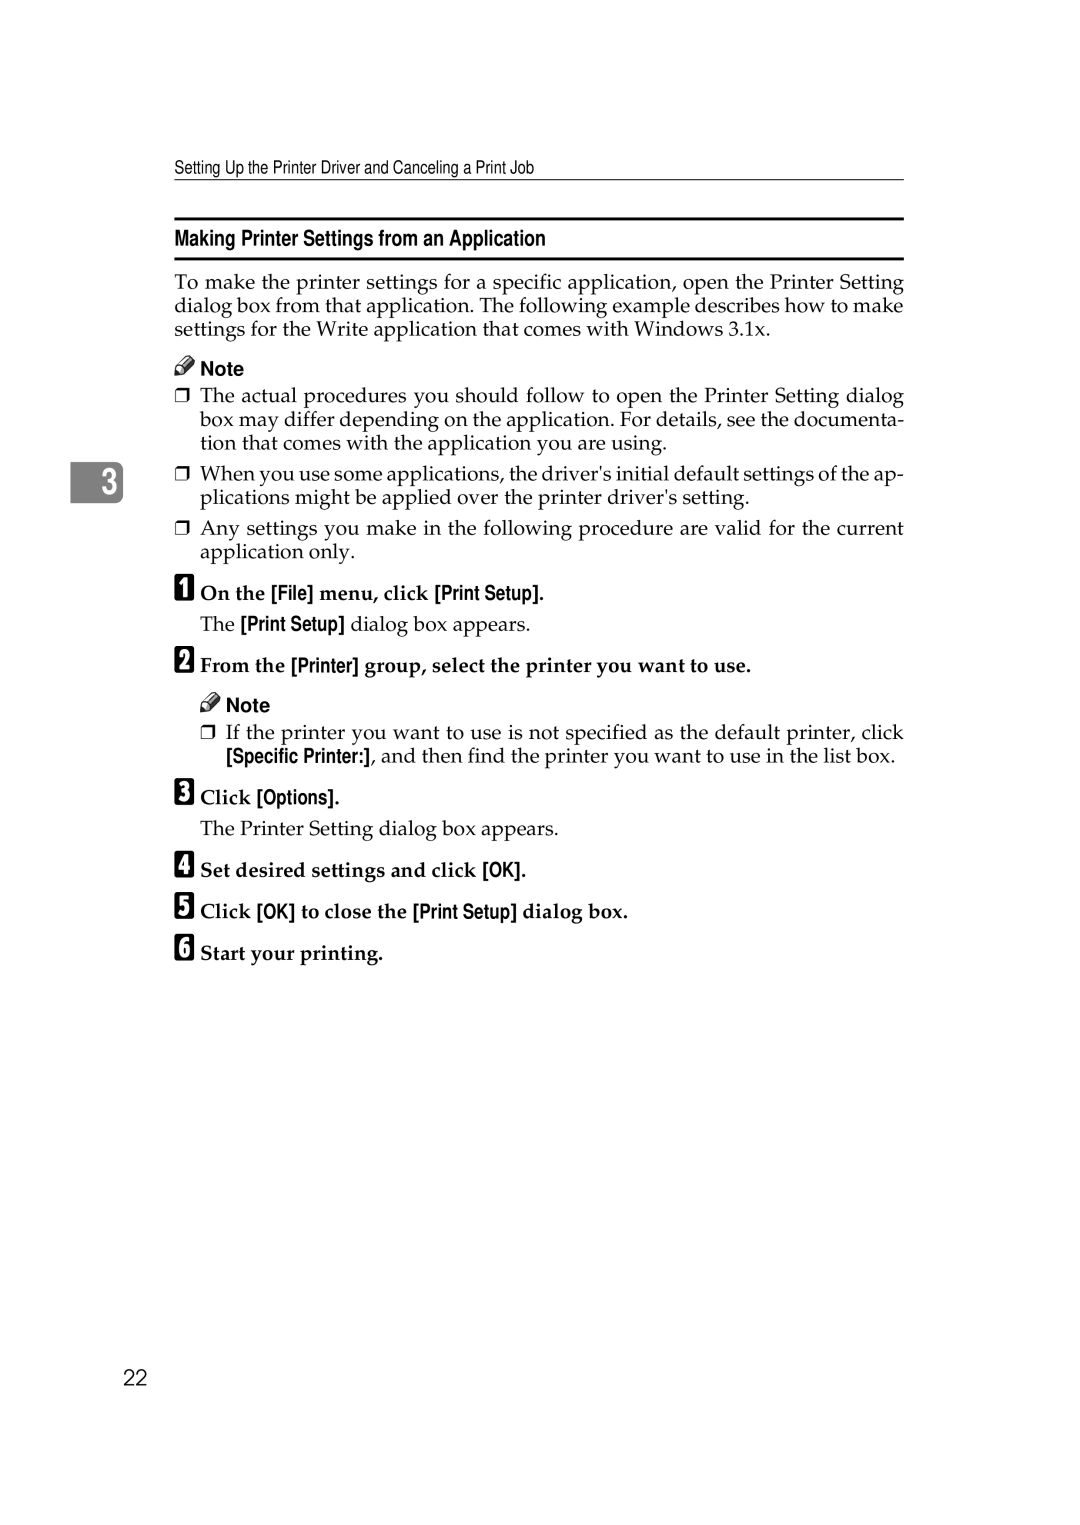 Ricoh Aficio AP2700 operating instructions Making Printer Settings from an Application 